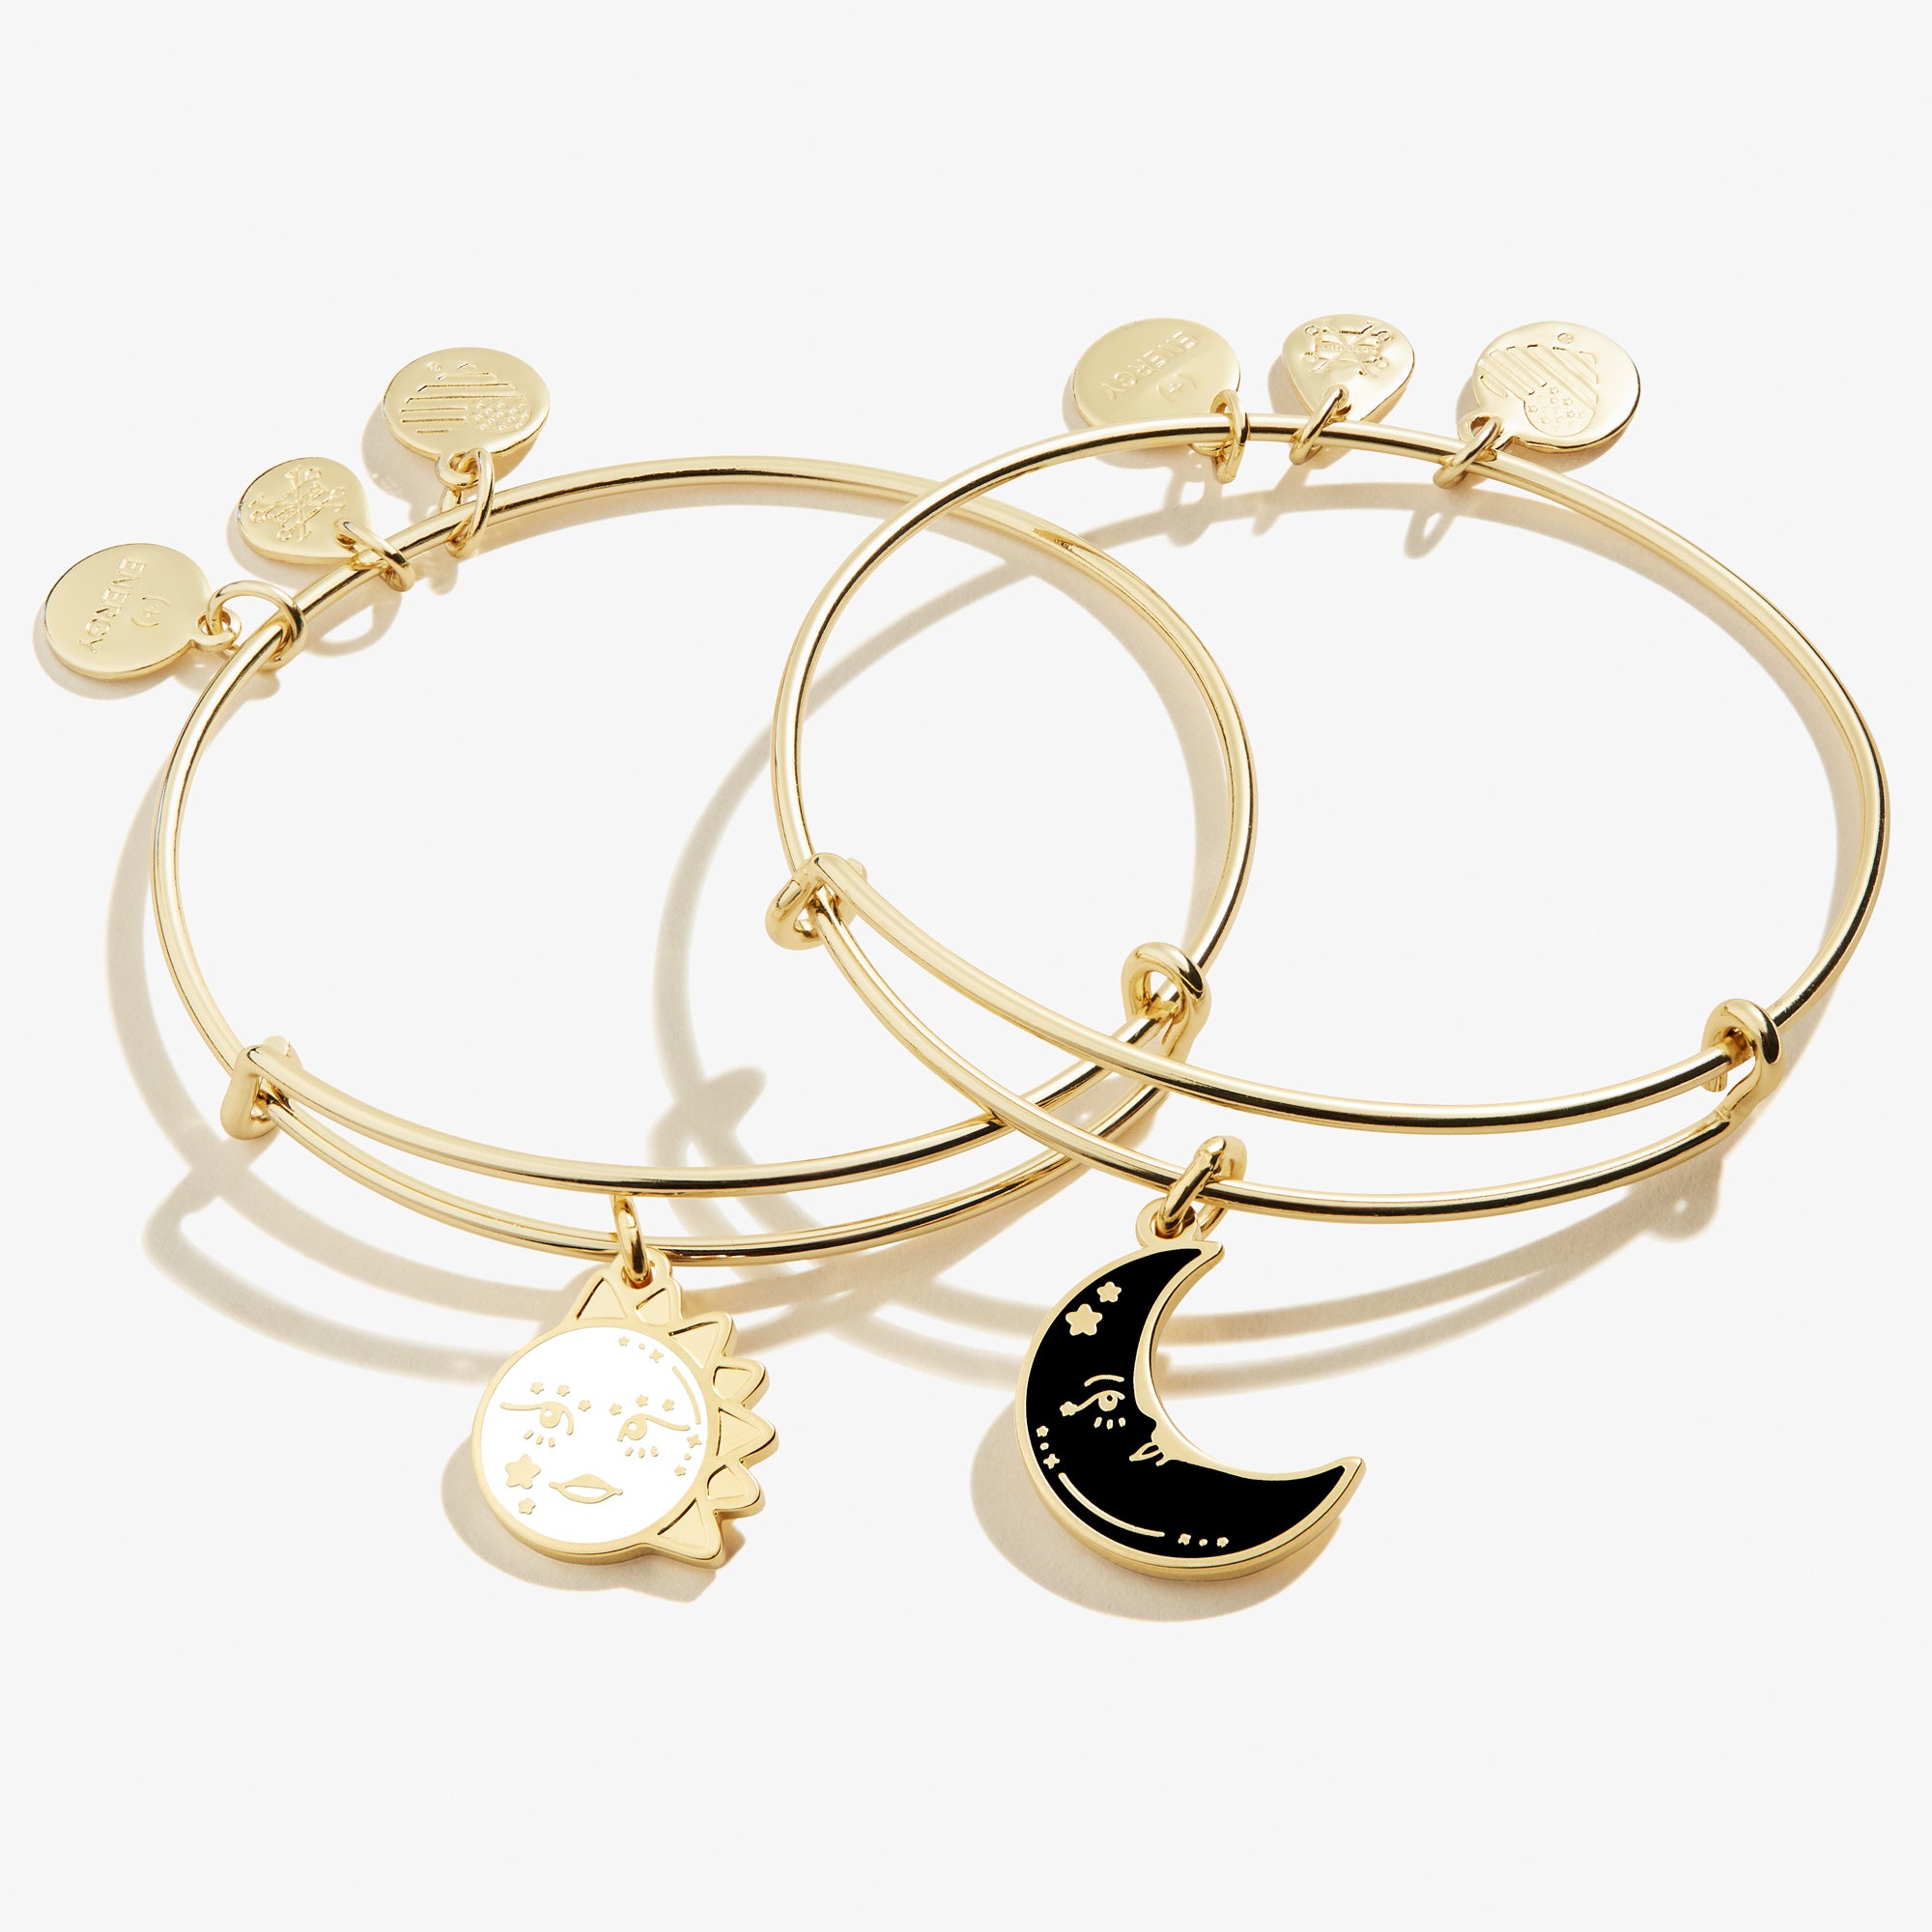 Best Friends Set of 2 Expandable Alex and ANI Charity by Design